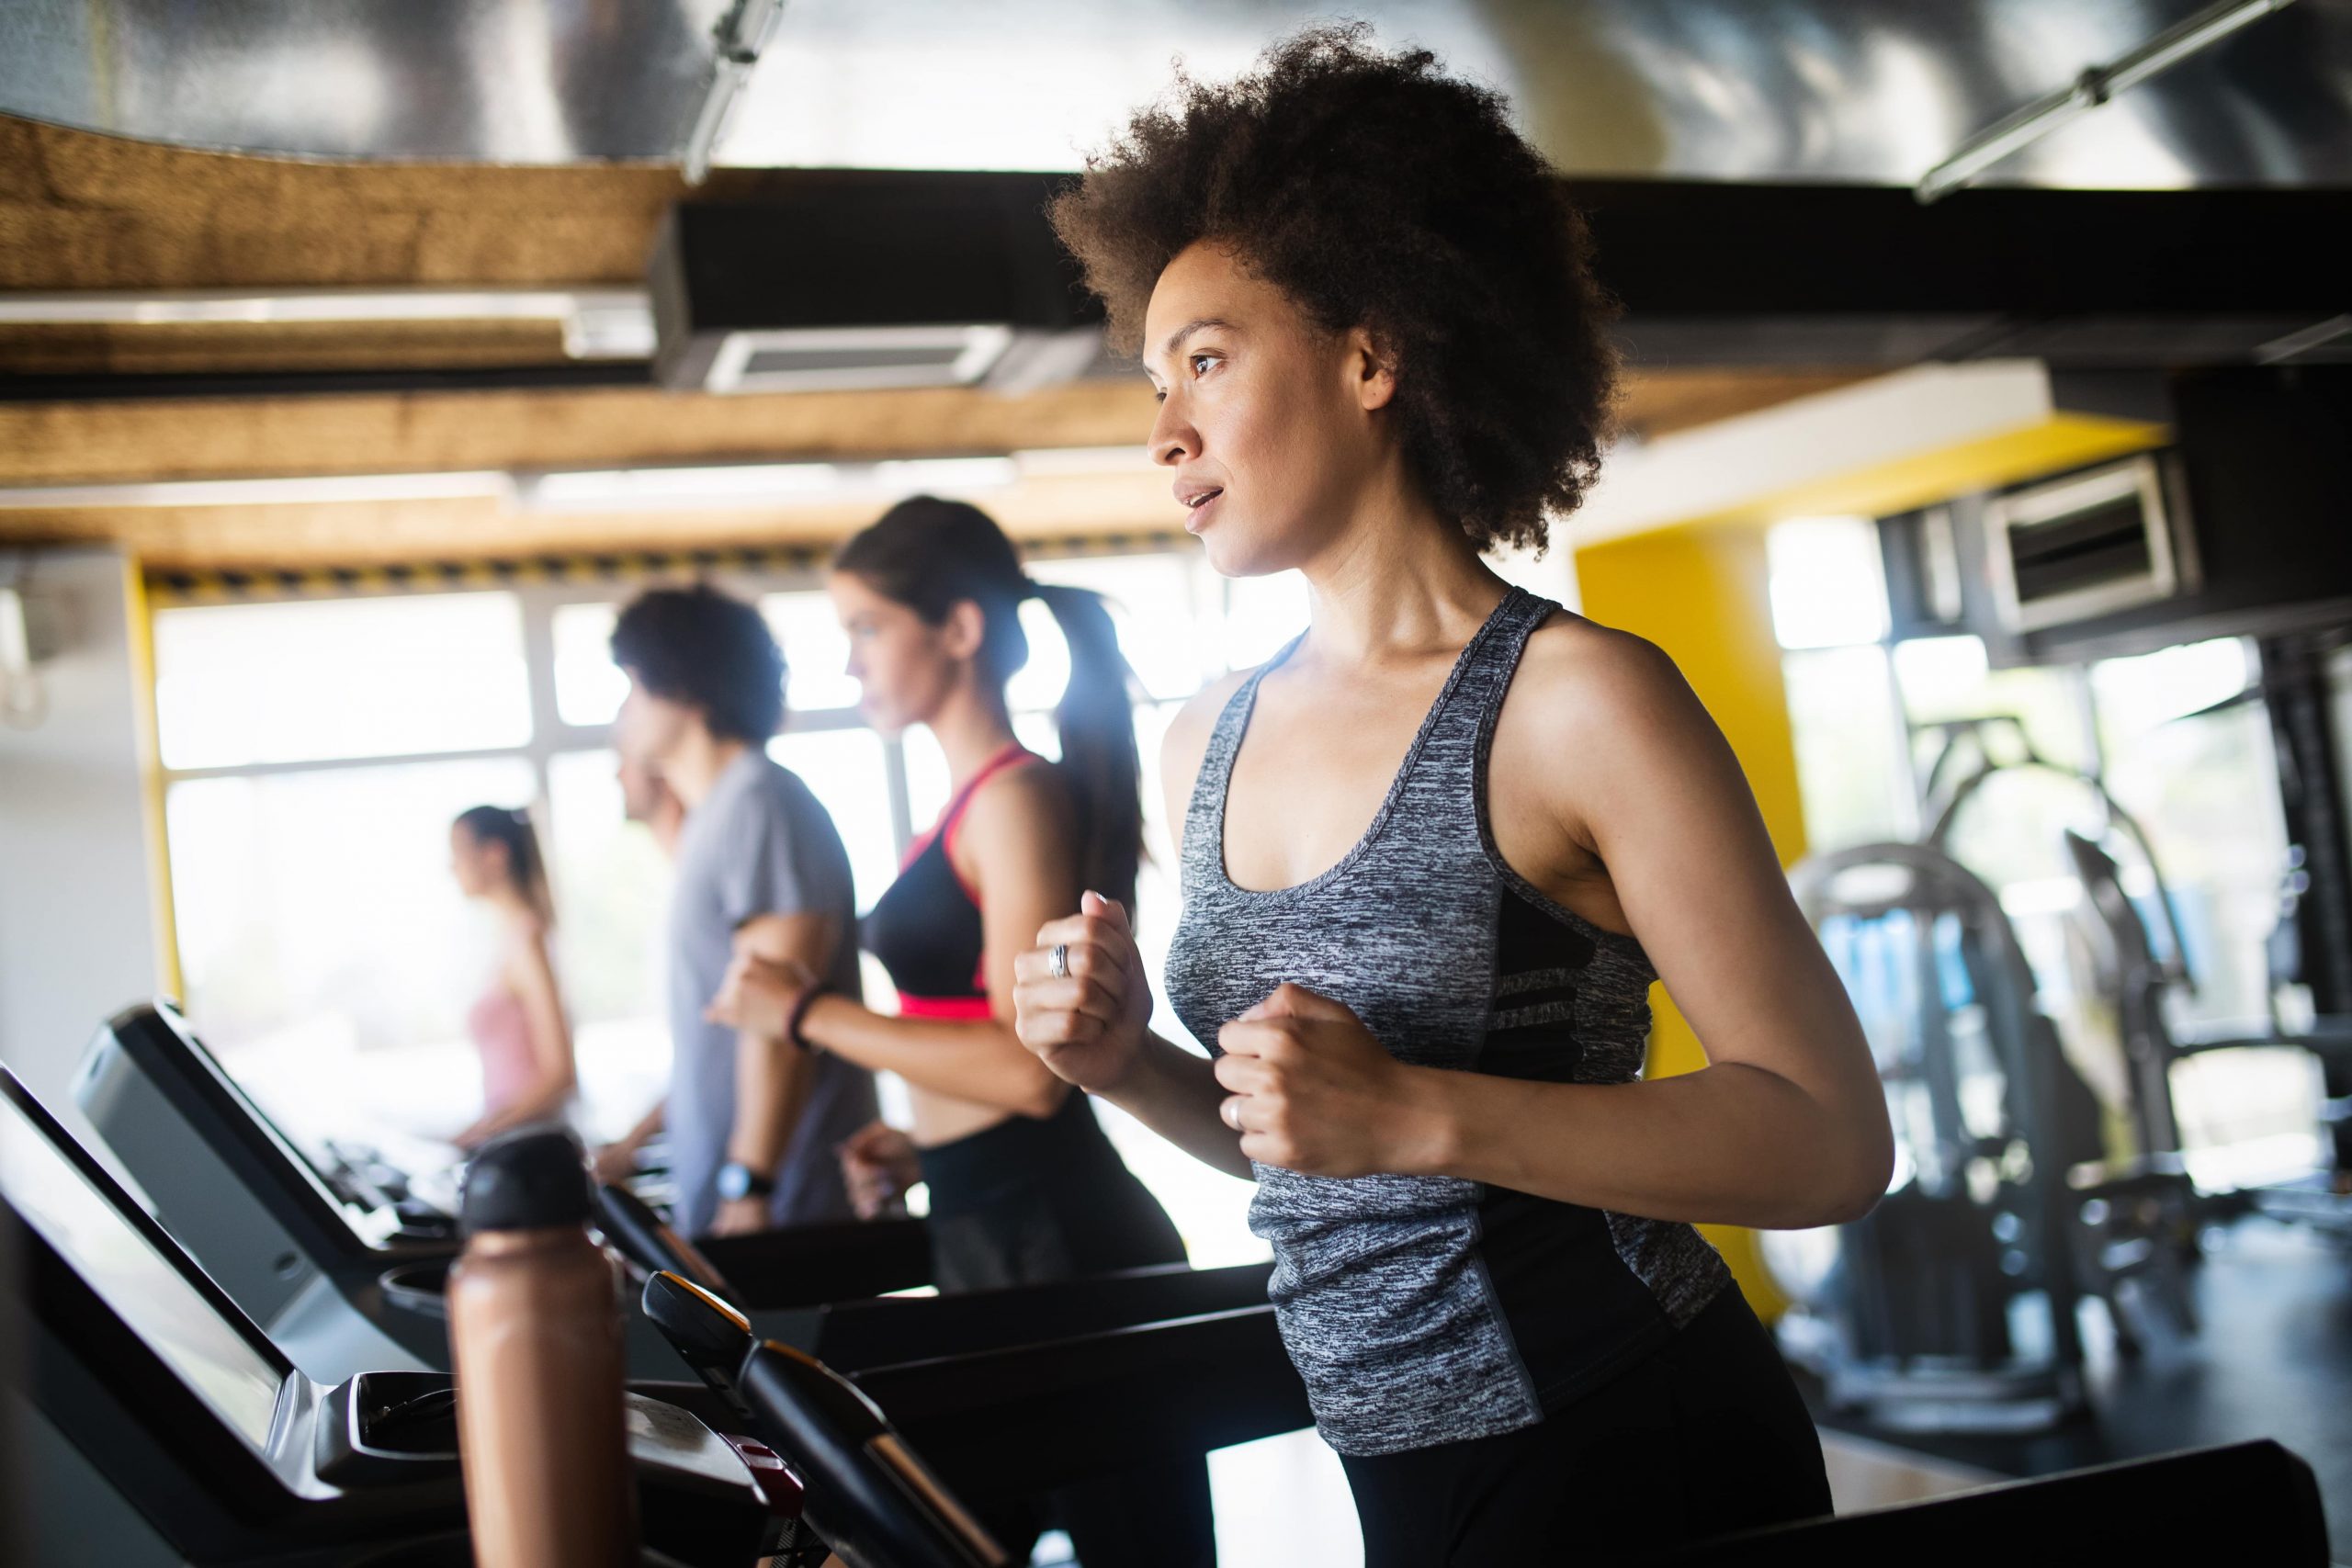 The Health & Fitness Industry Is Estimated To Reach $100 Billion In 2019